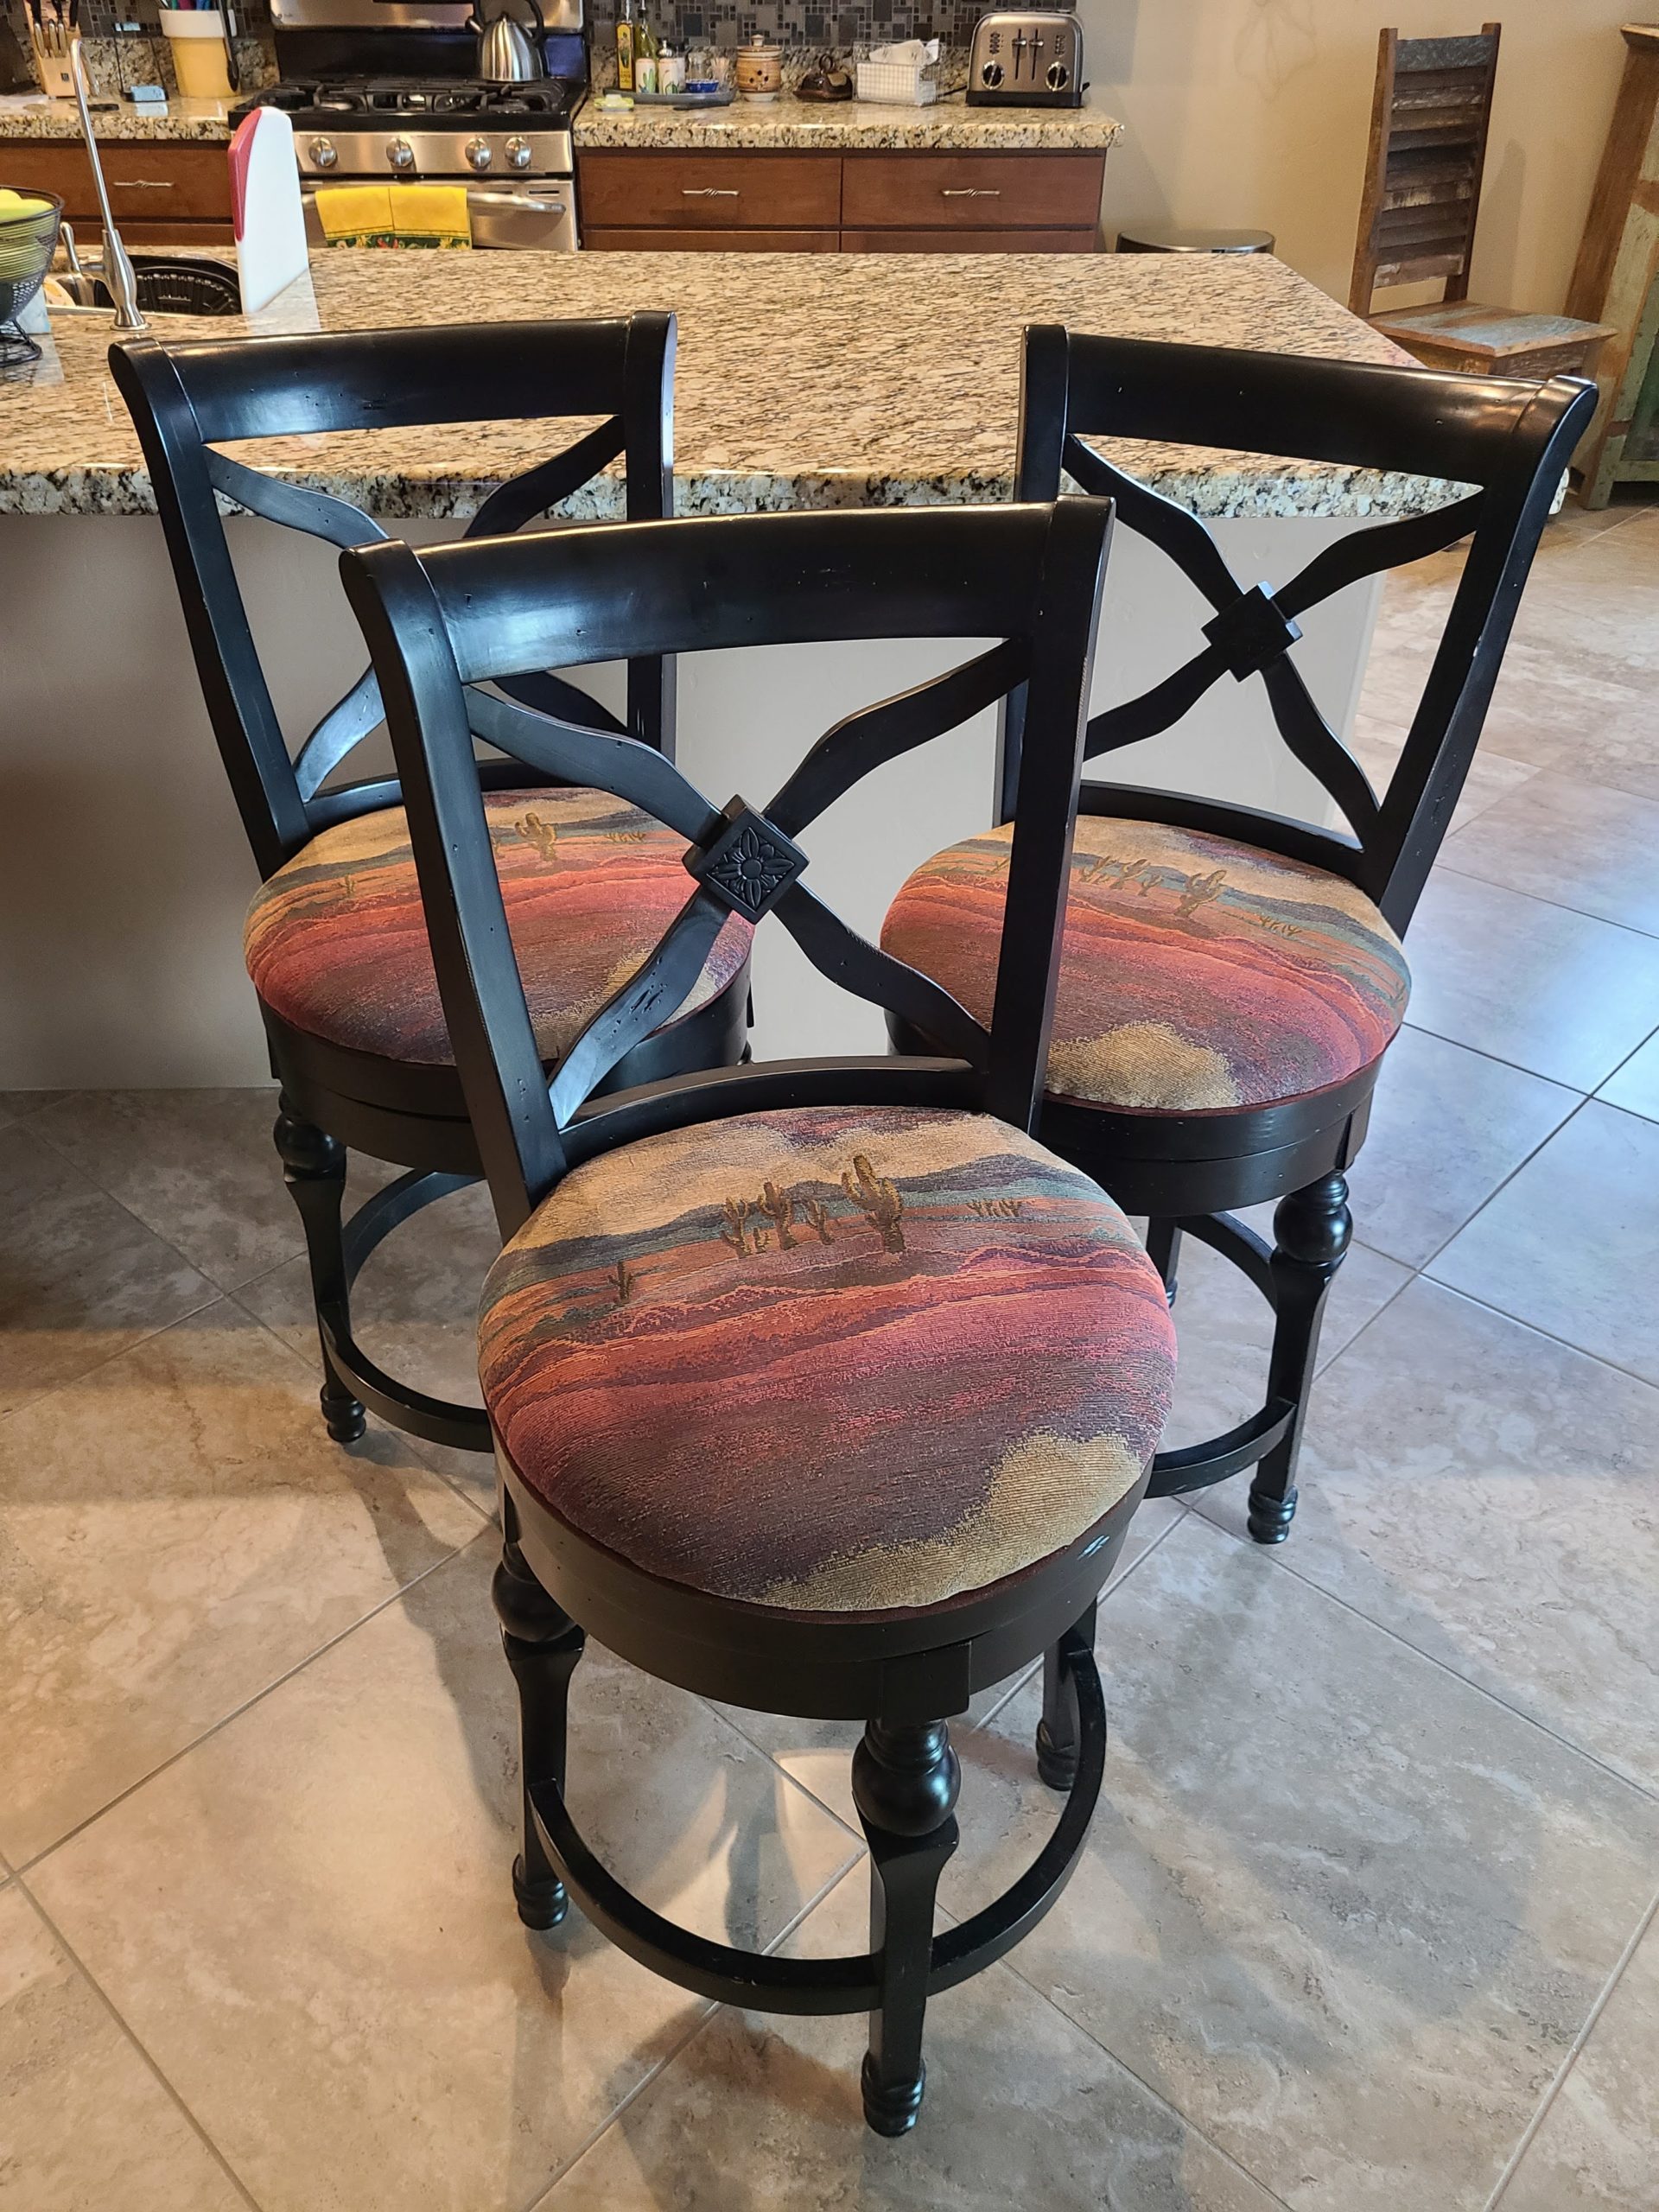 Southwestern Barstools from our Tucson fabric store